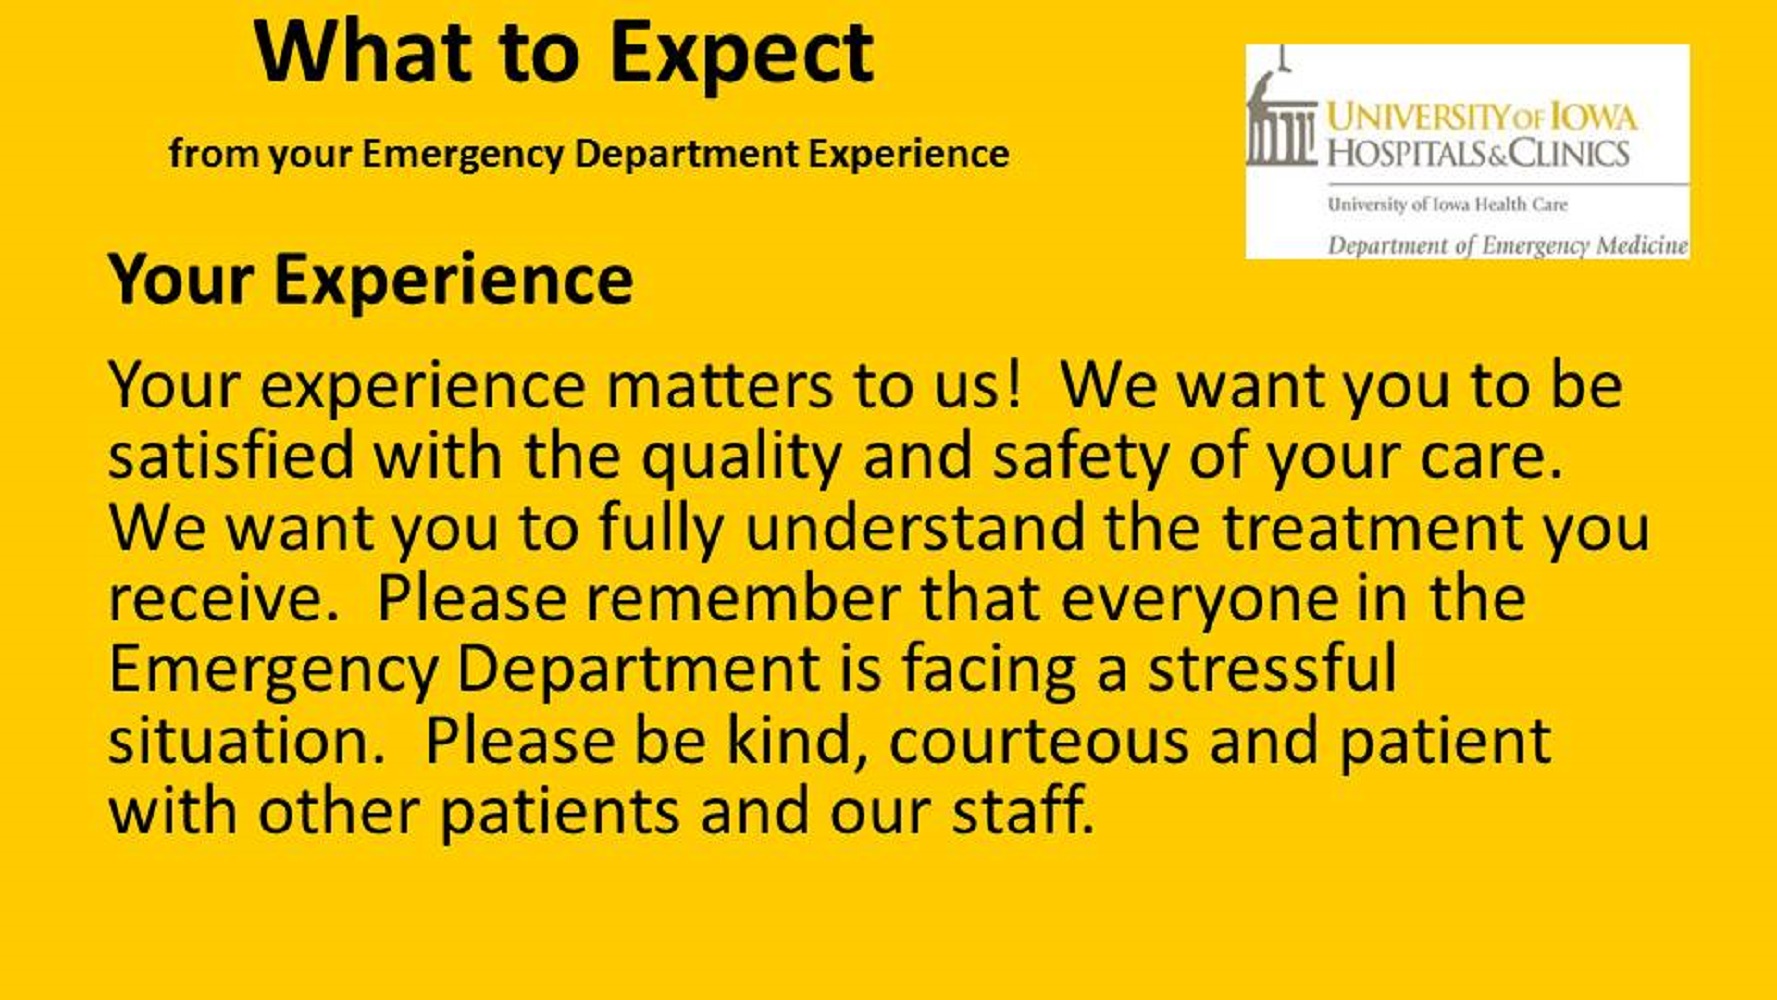 Your experience